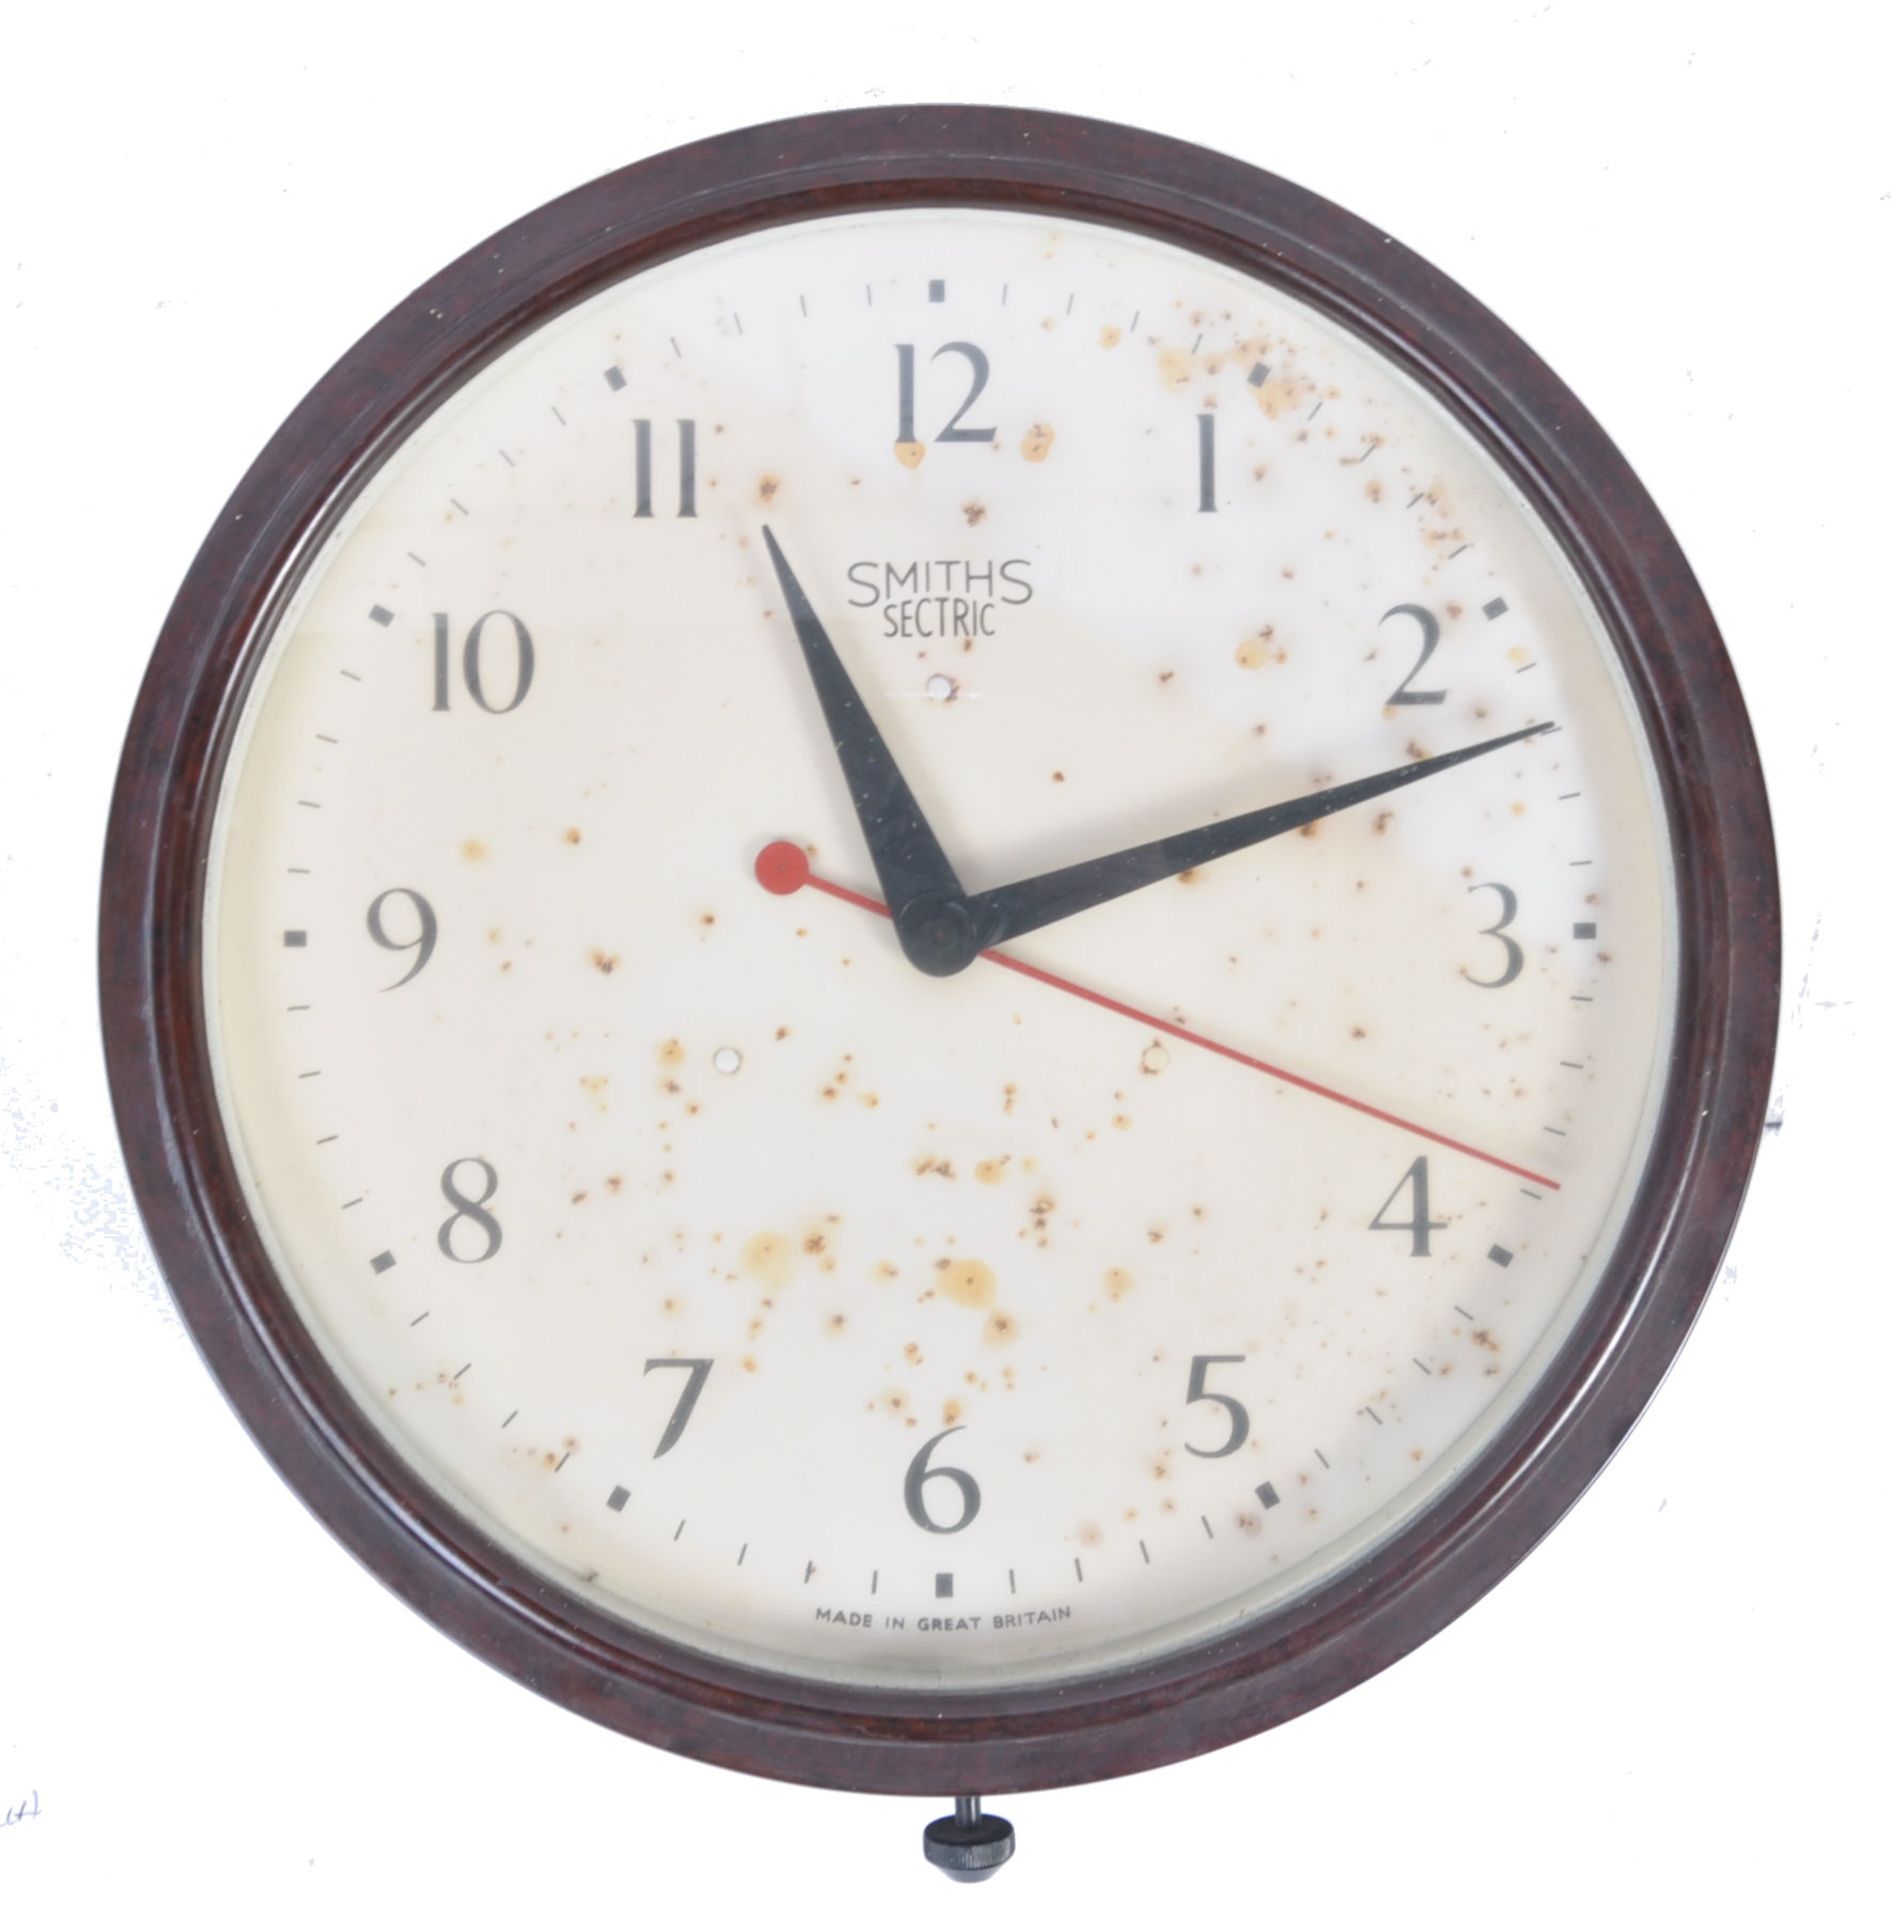 ORIGINAL SMITHS SECTRIC 1930'S STATION WALL CLOCK